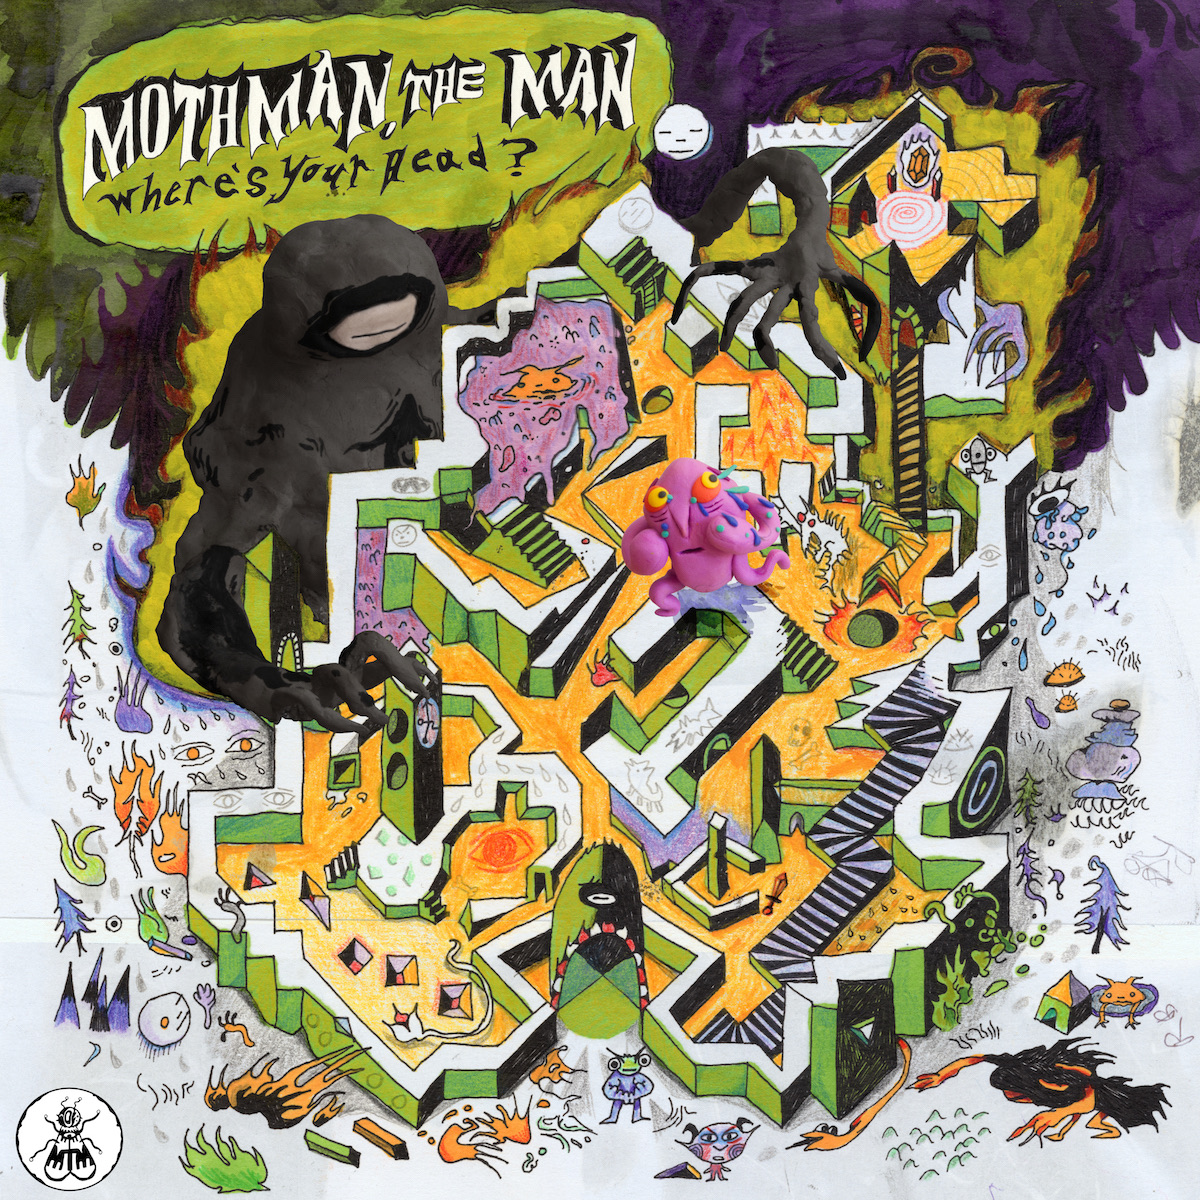 ALBUM REVIEW: Where’s Your Head? by Mothman, The Man